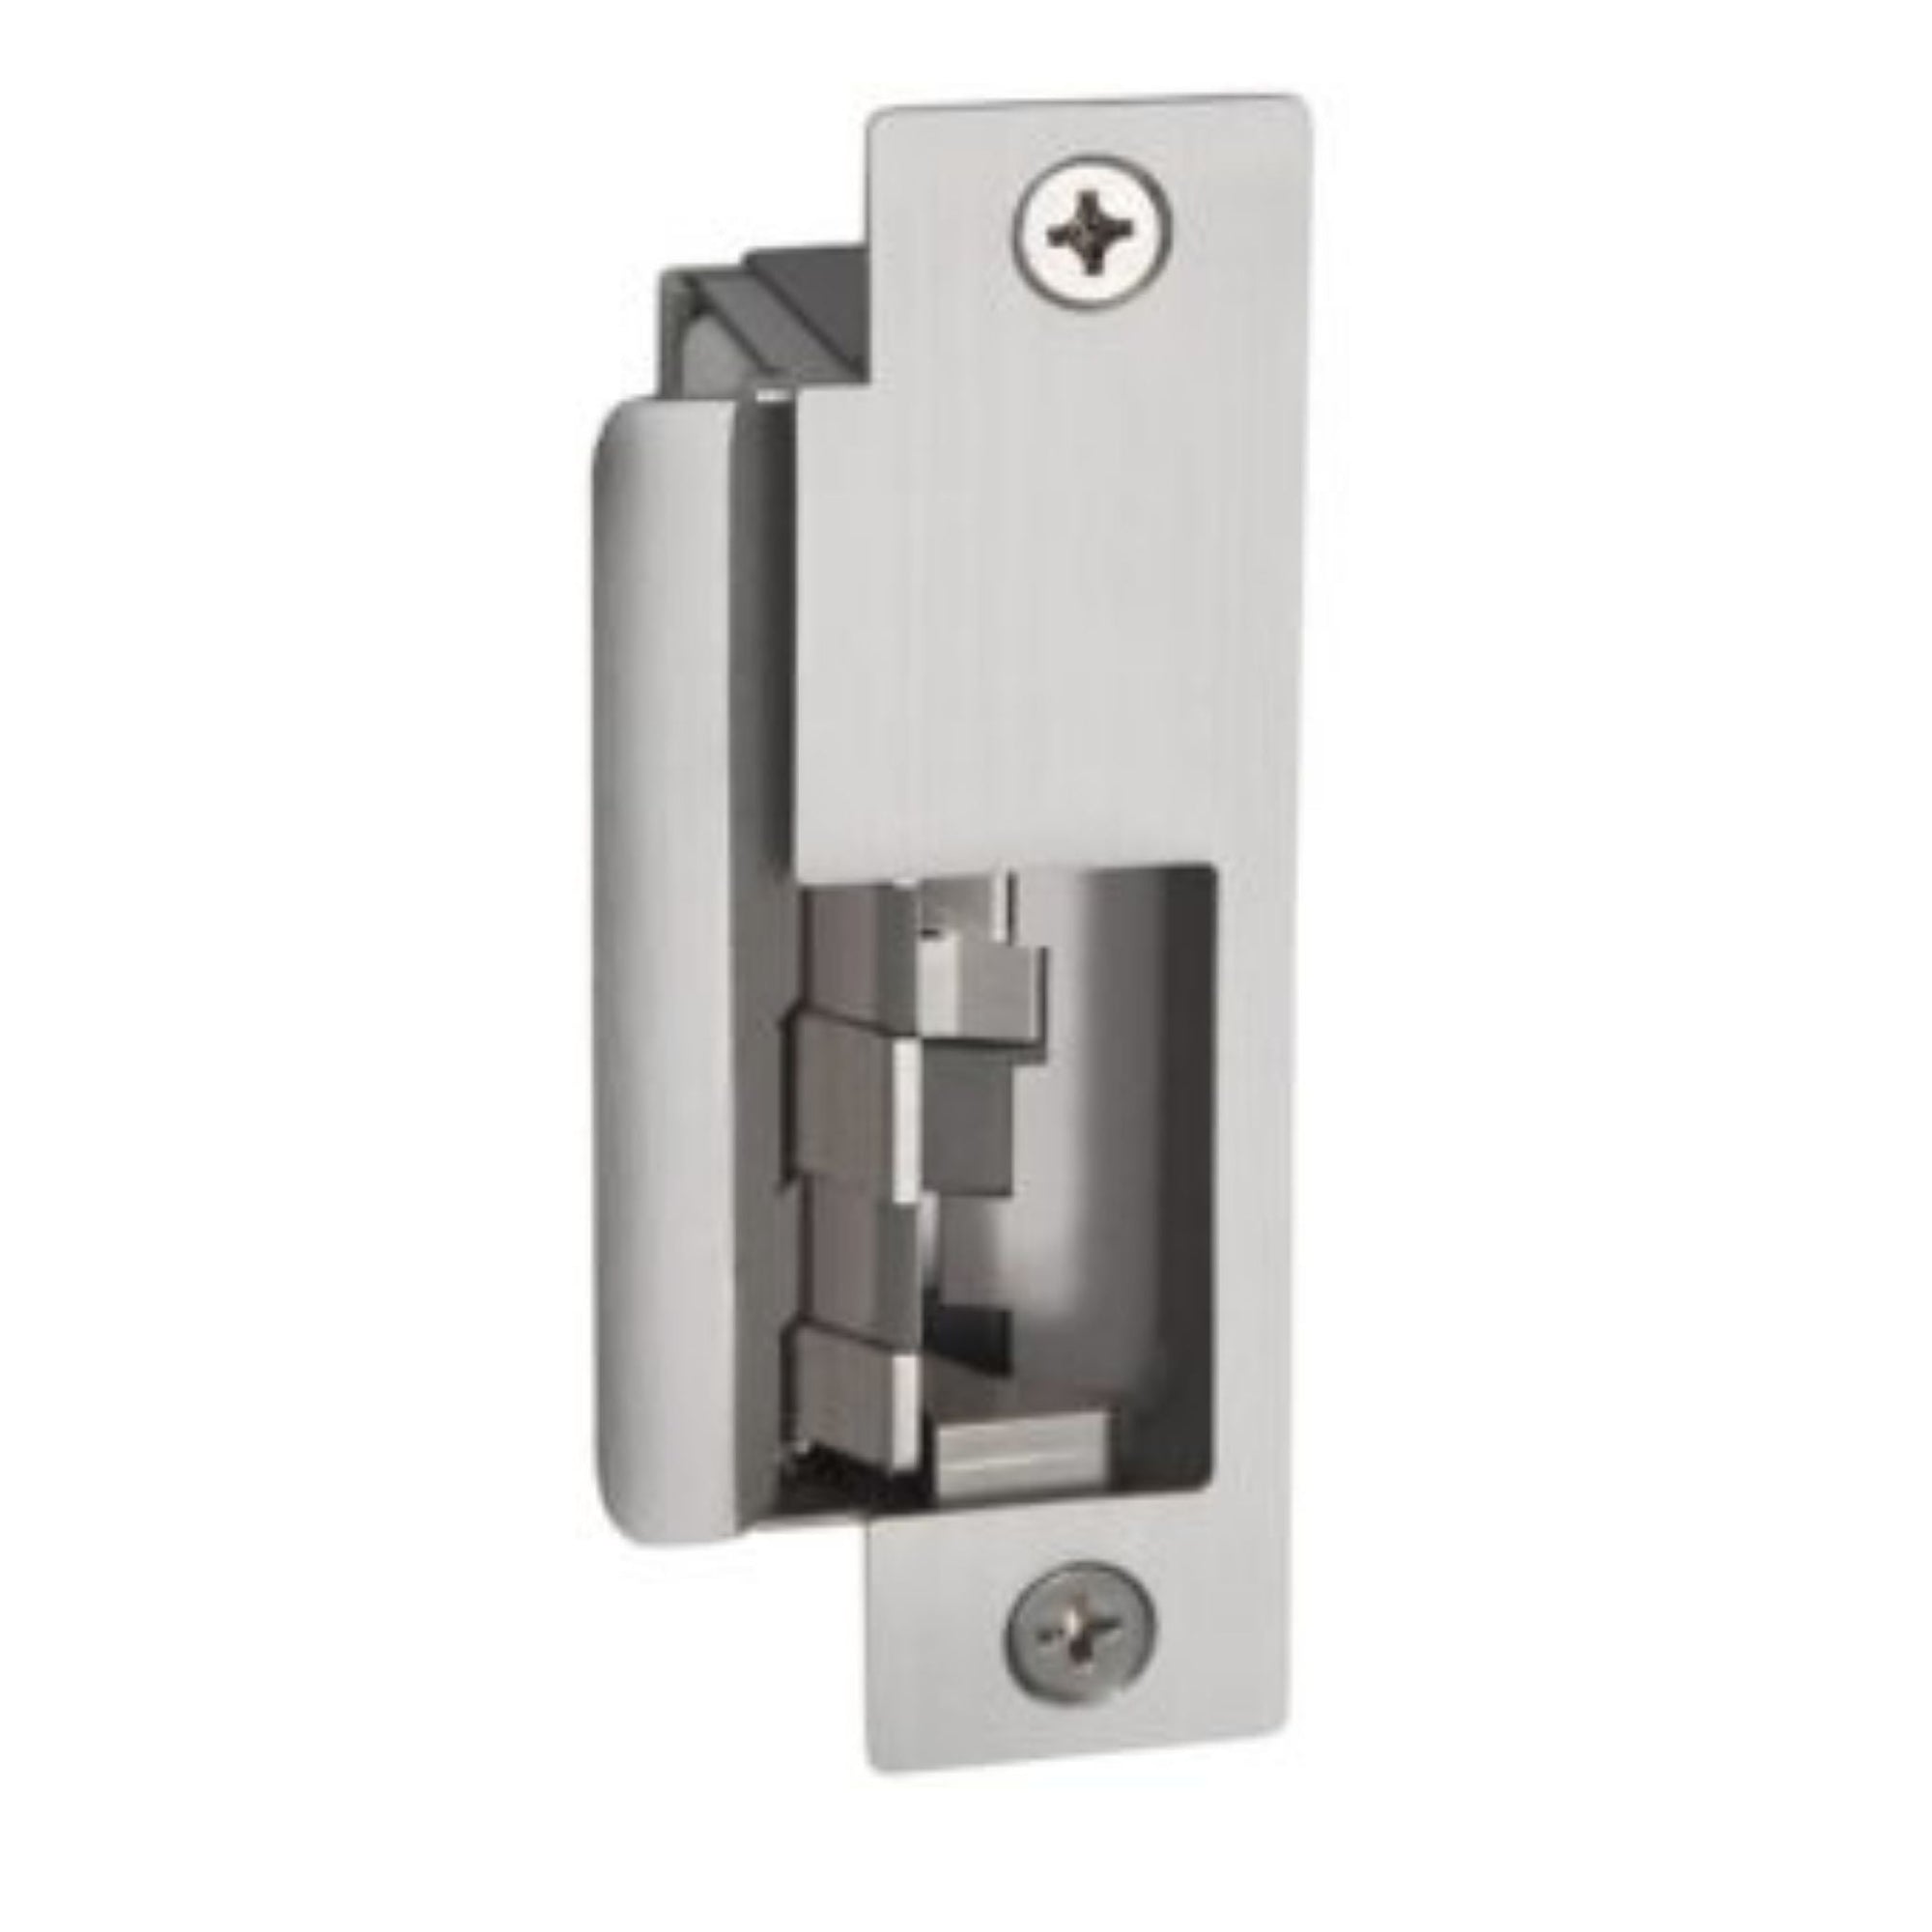 HES 8500-630-LBM Fire Rated Electric Strike with Latchbolt Monitor, Satin Stainless Steel - The Lock Source